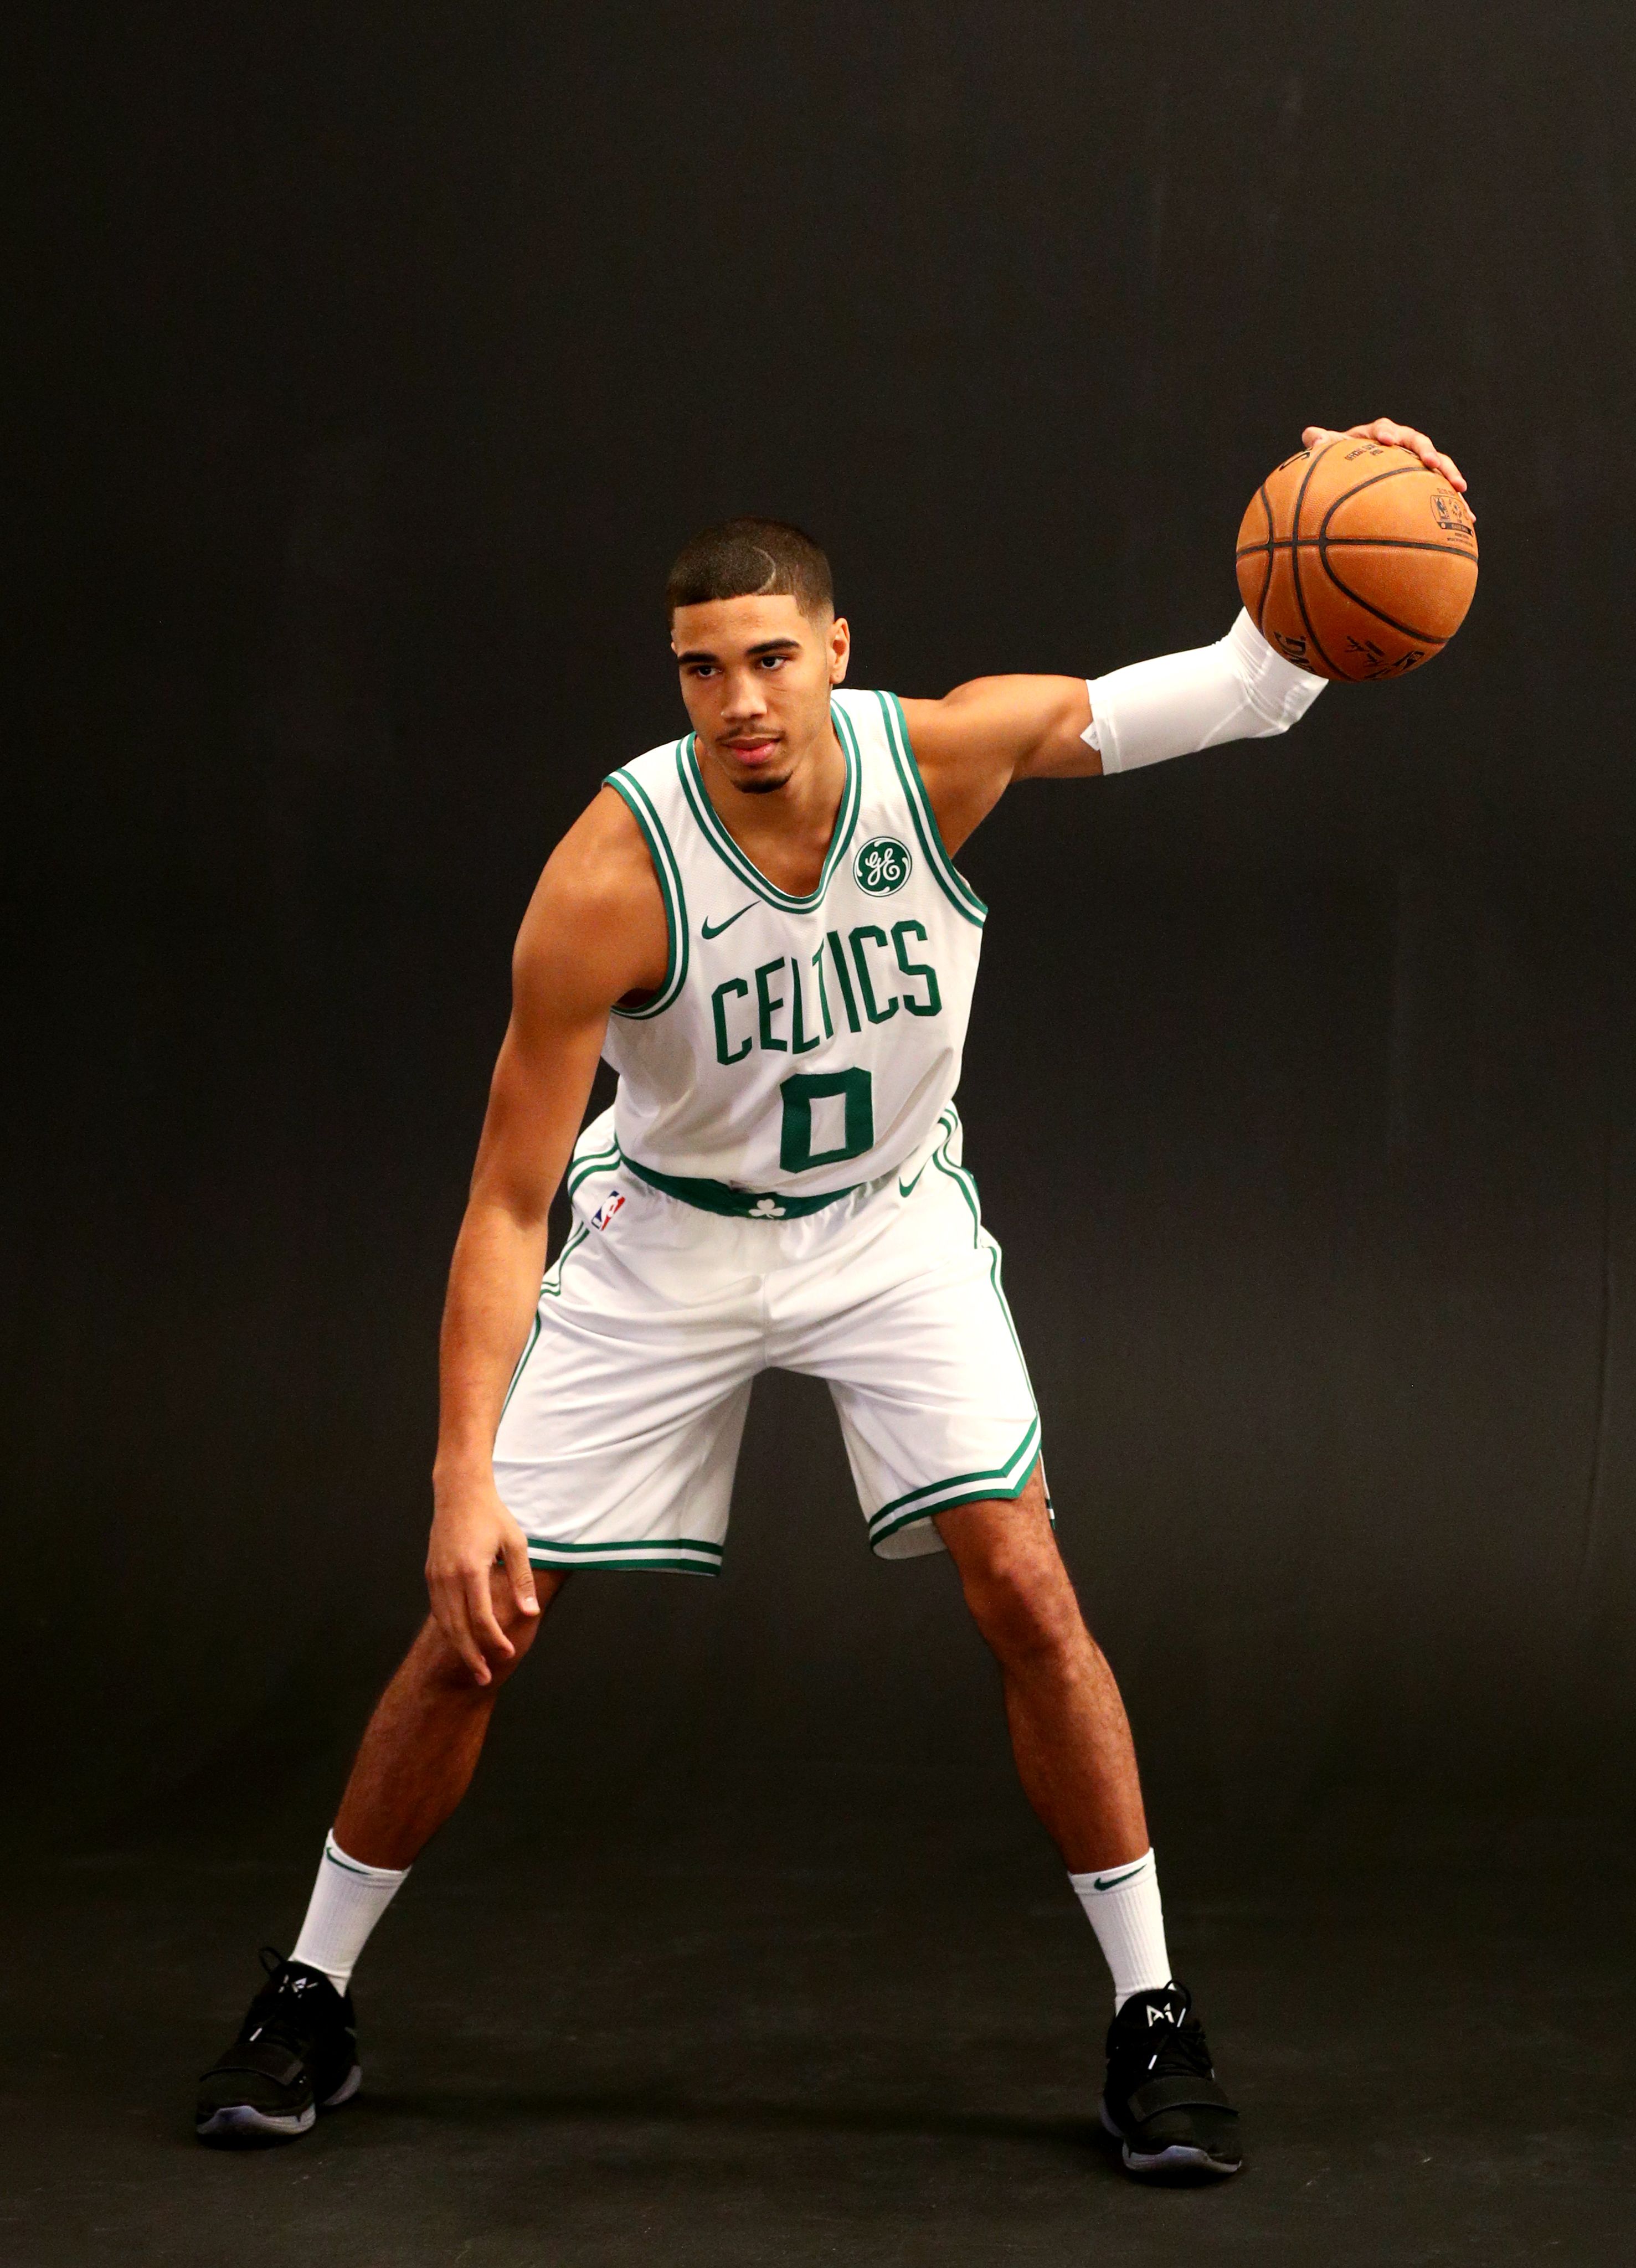 Body of work: Marcus Smart, Jaylen Brown, and Jayson Tatum are all